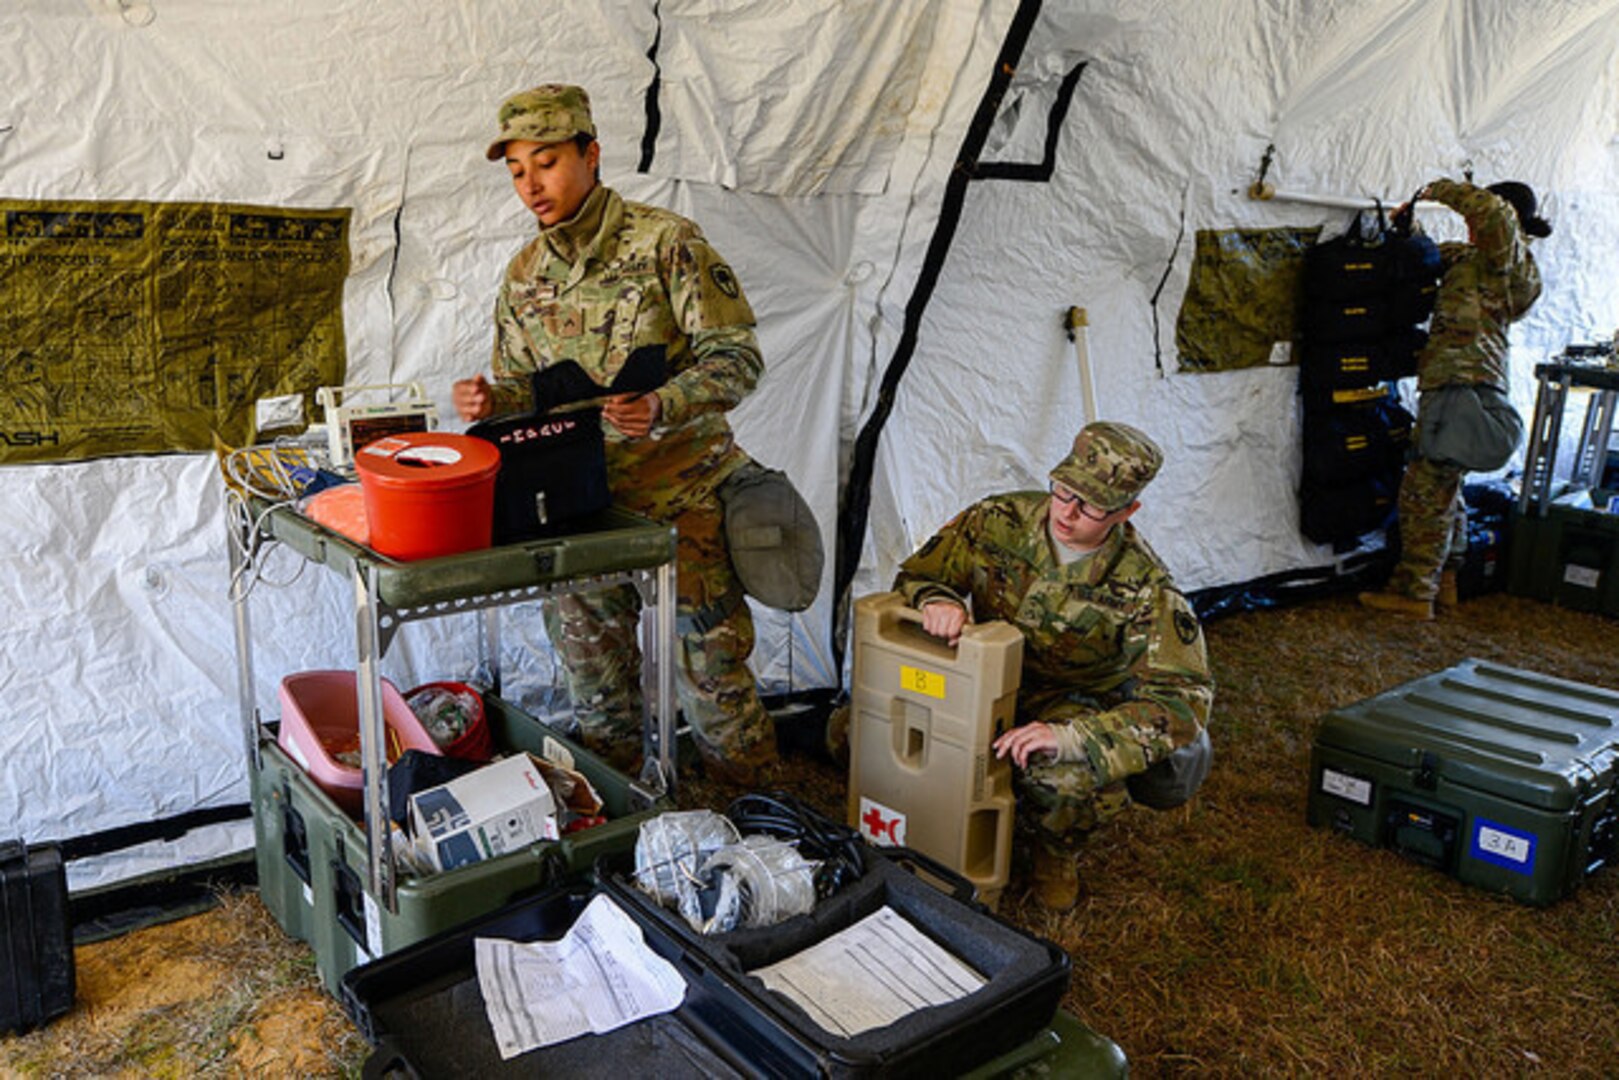 Lithuanian Soldiers Train Pennsylvania Guard on Weapon System